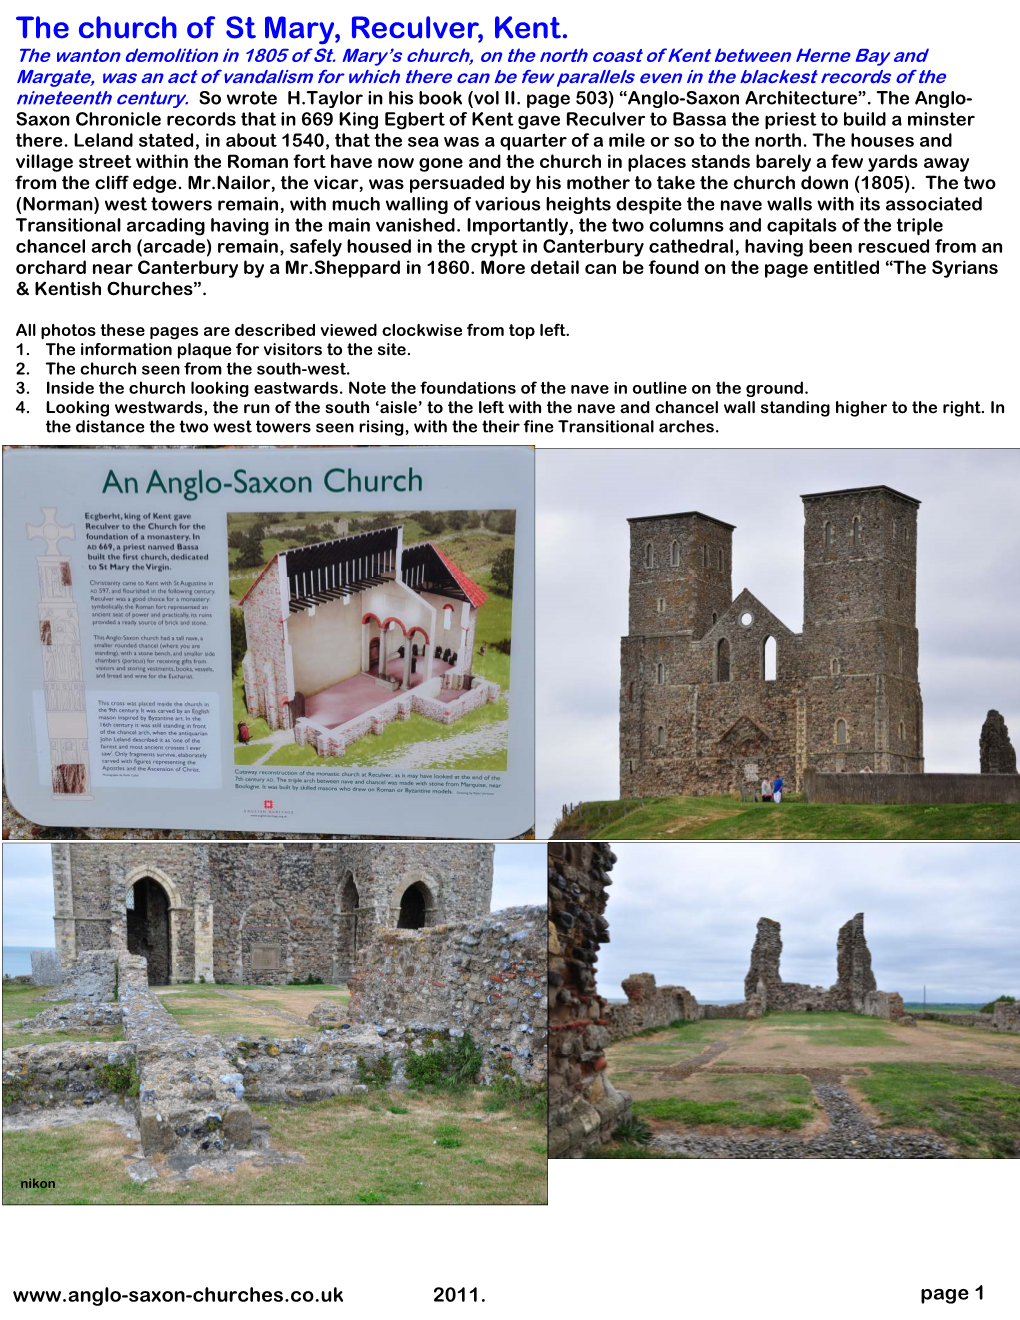 The Church of St Mary, Reculver, Kent. the Wanton Demolition in 1805 of St